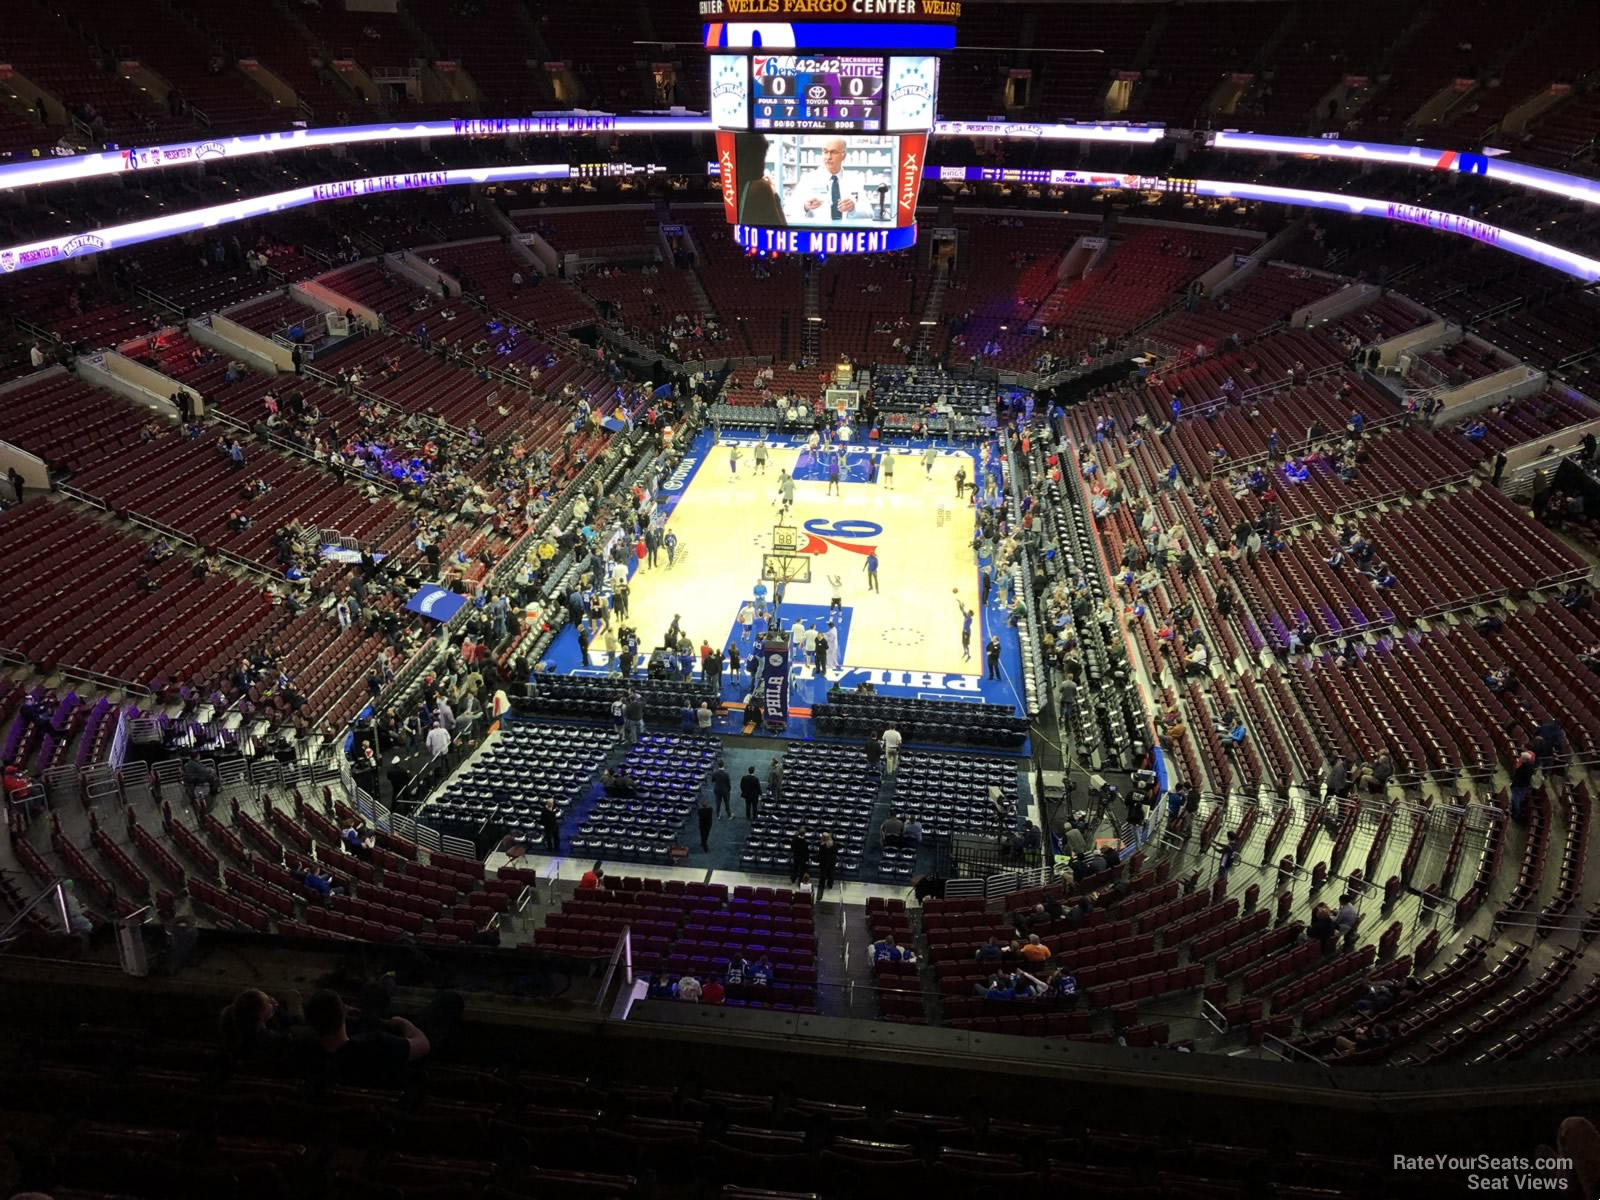 section 207a, row 7 seat view  for basketball - wells fargo center